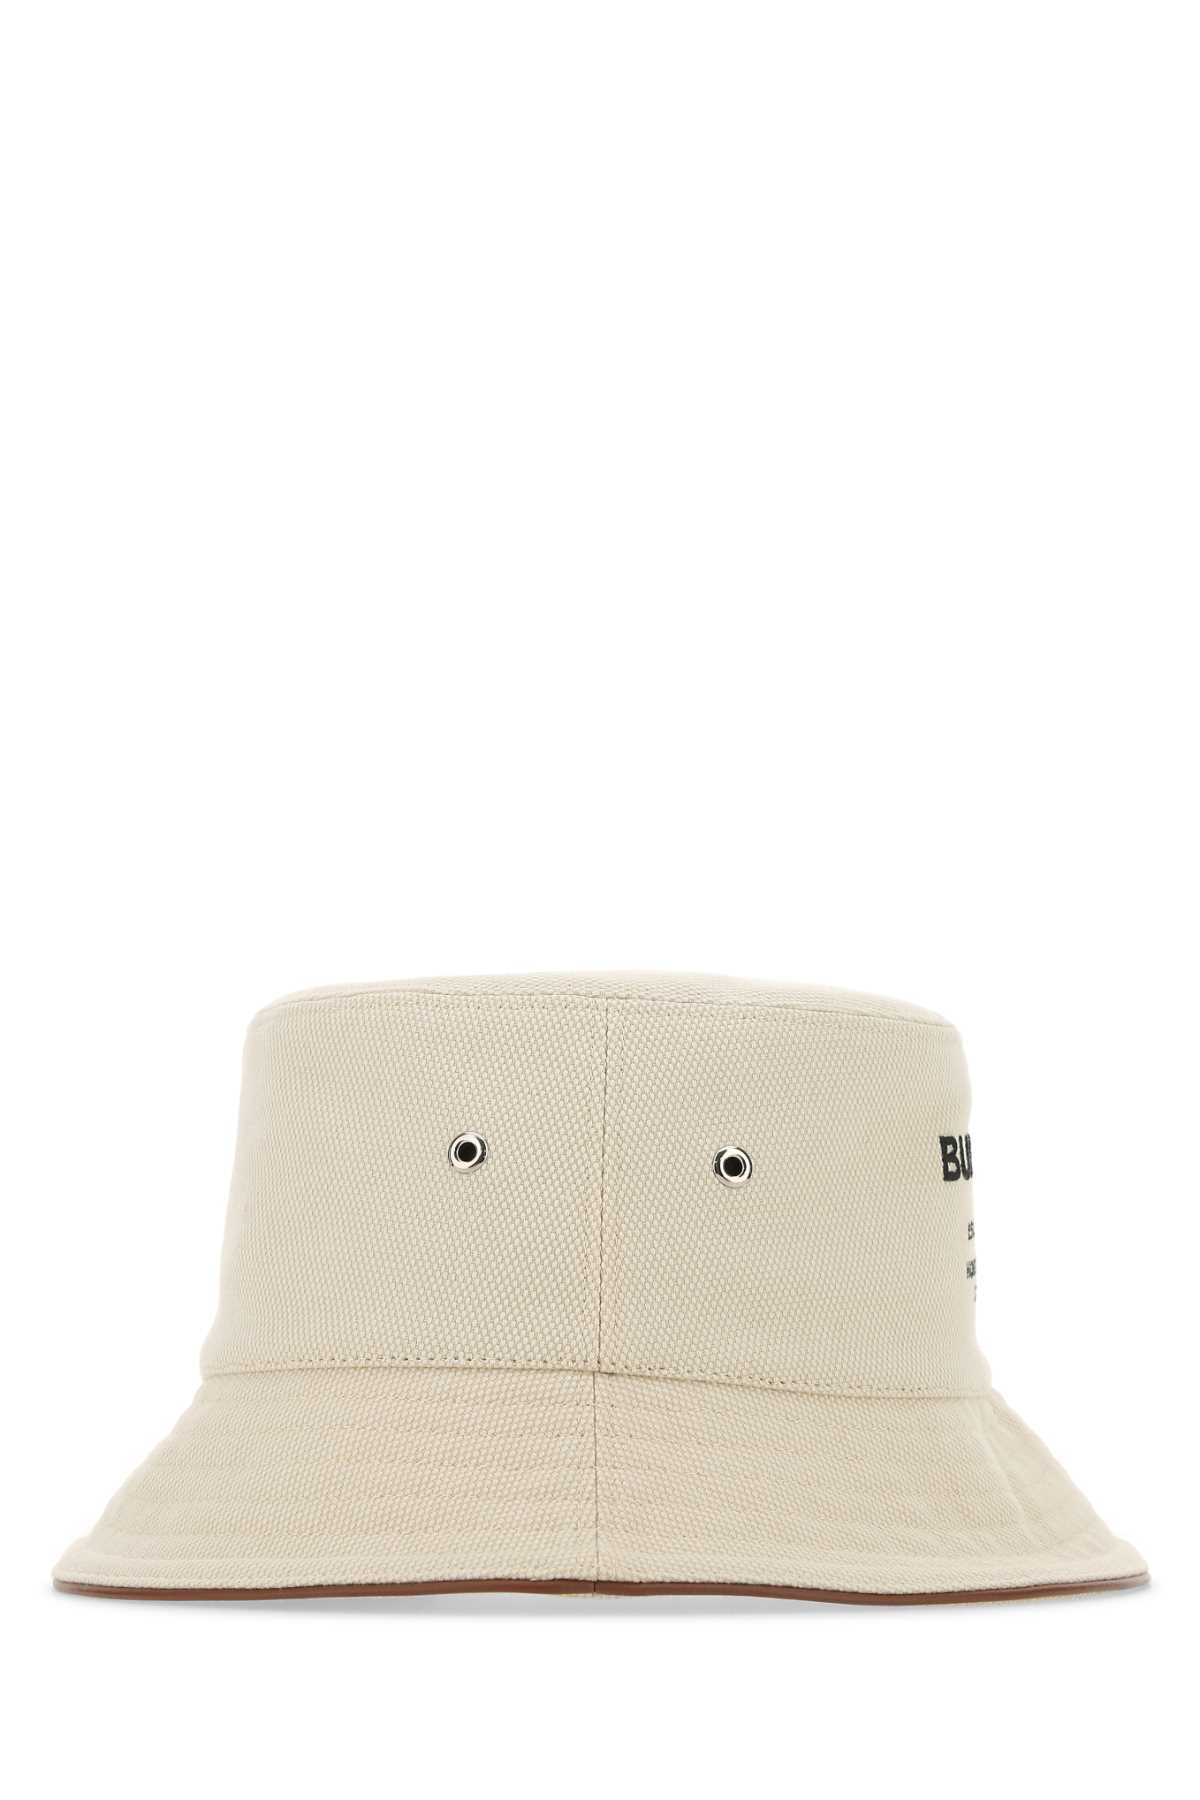 Shop Burberry Sand Cotton Hat In A1395